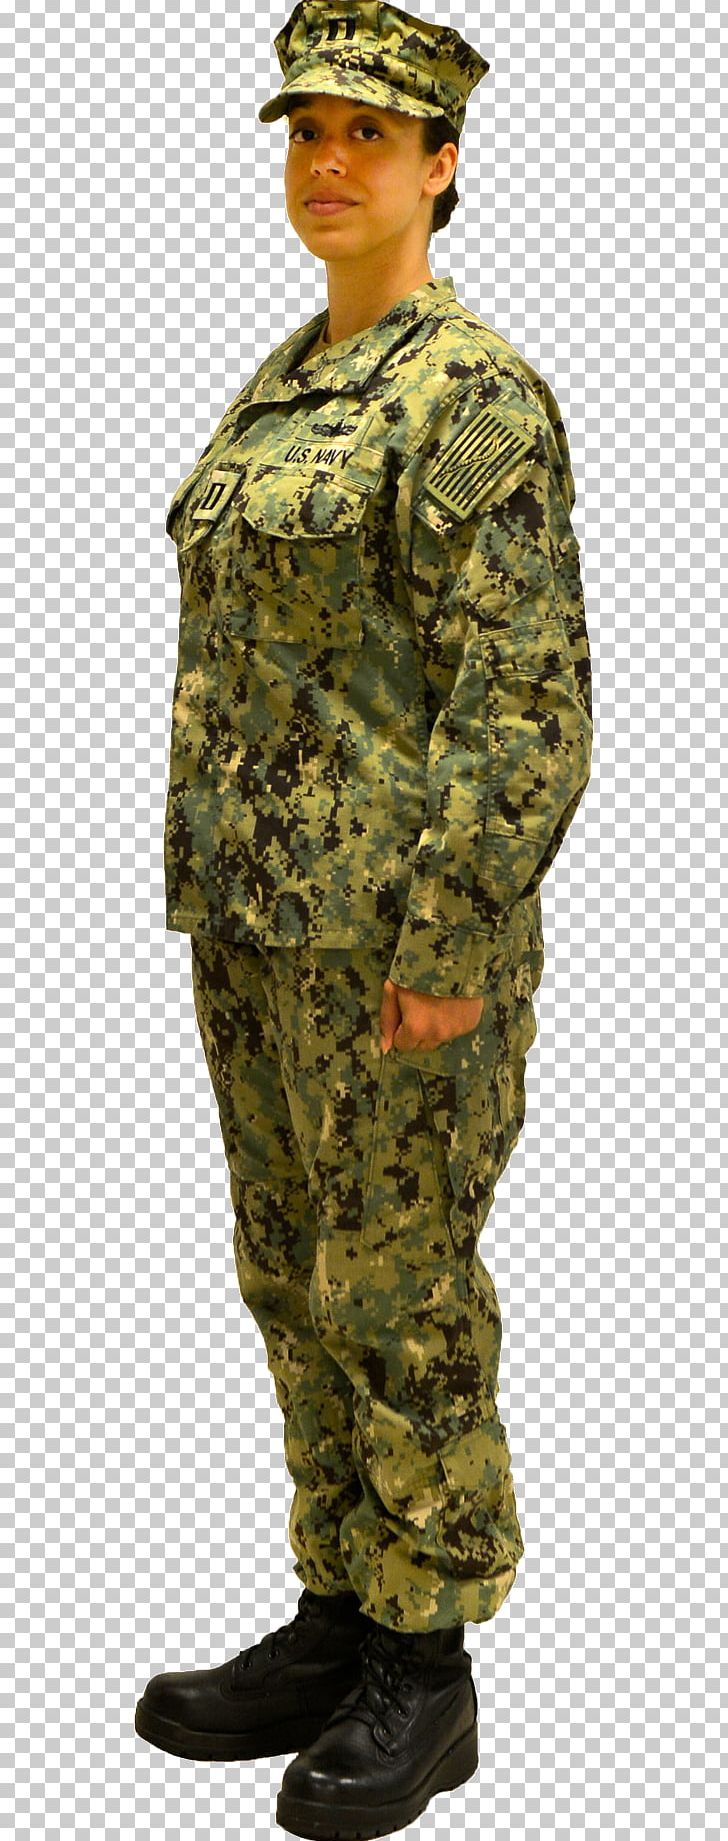 United States Navy Military Camouflage Uniform Sailor PNG, Clipart, Army, Camouflage, Chief Of Naval Operations, Clothing, Iii Free PNG Download